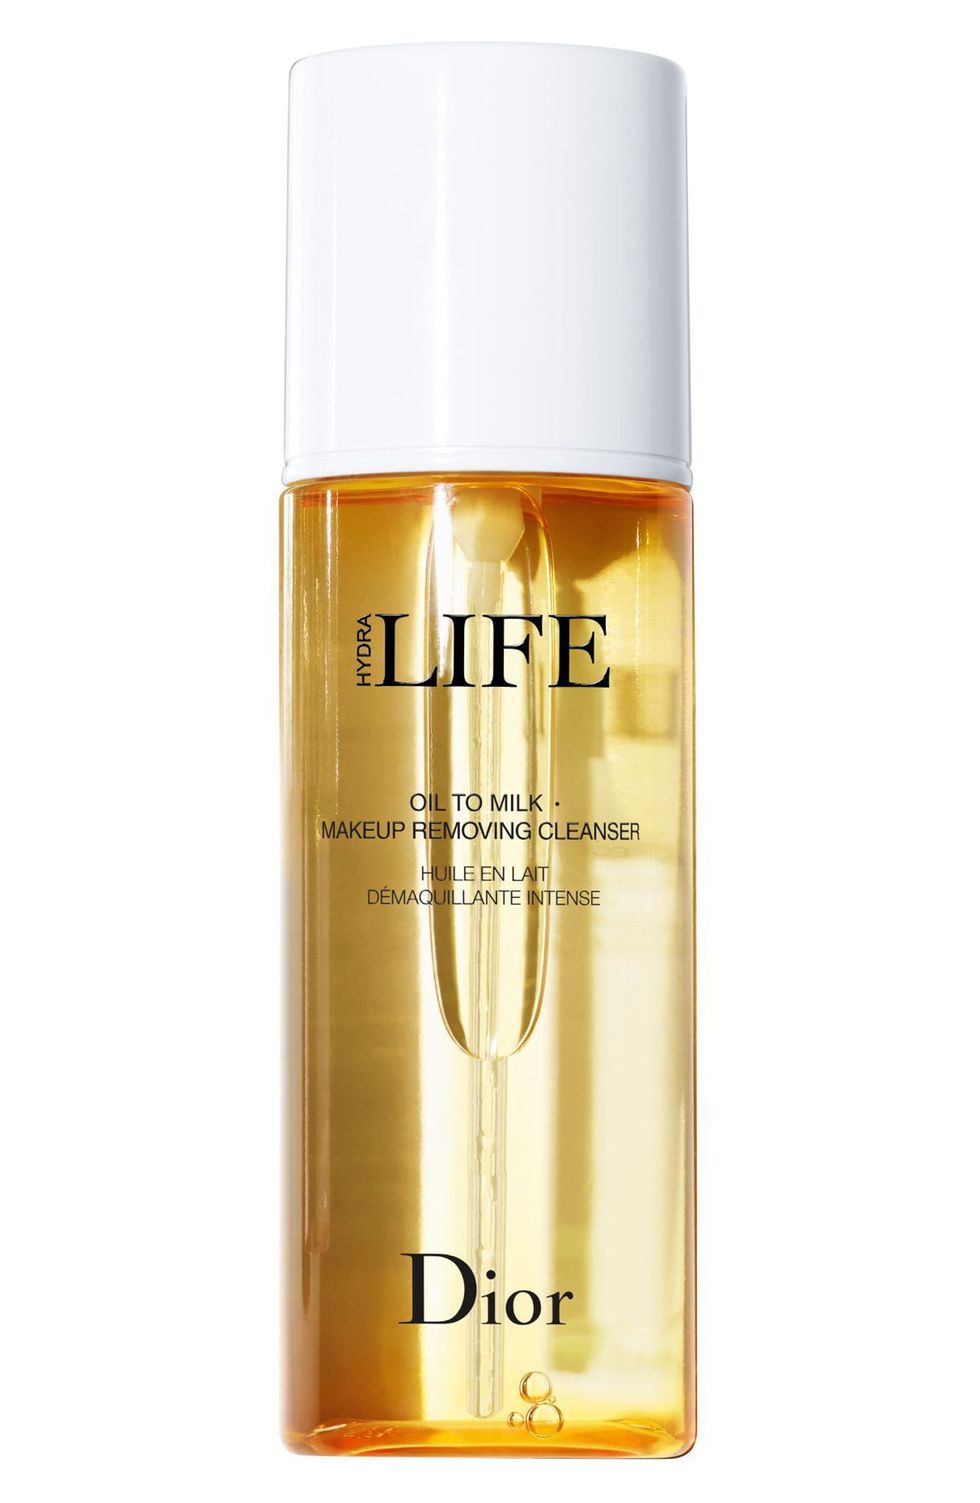 Hydra Life Oil to Milk Makeup Removing Cleanser